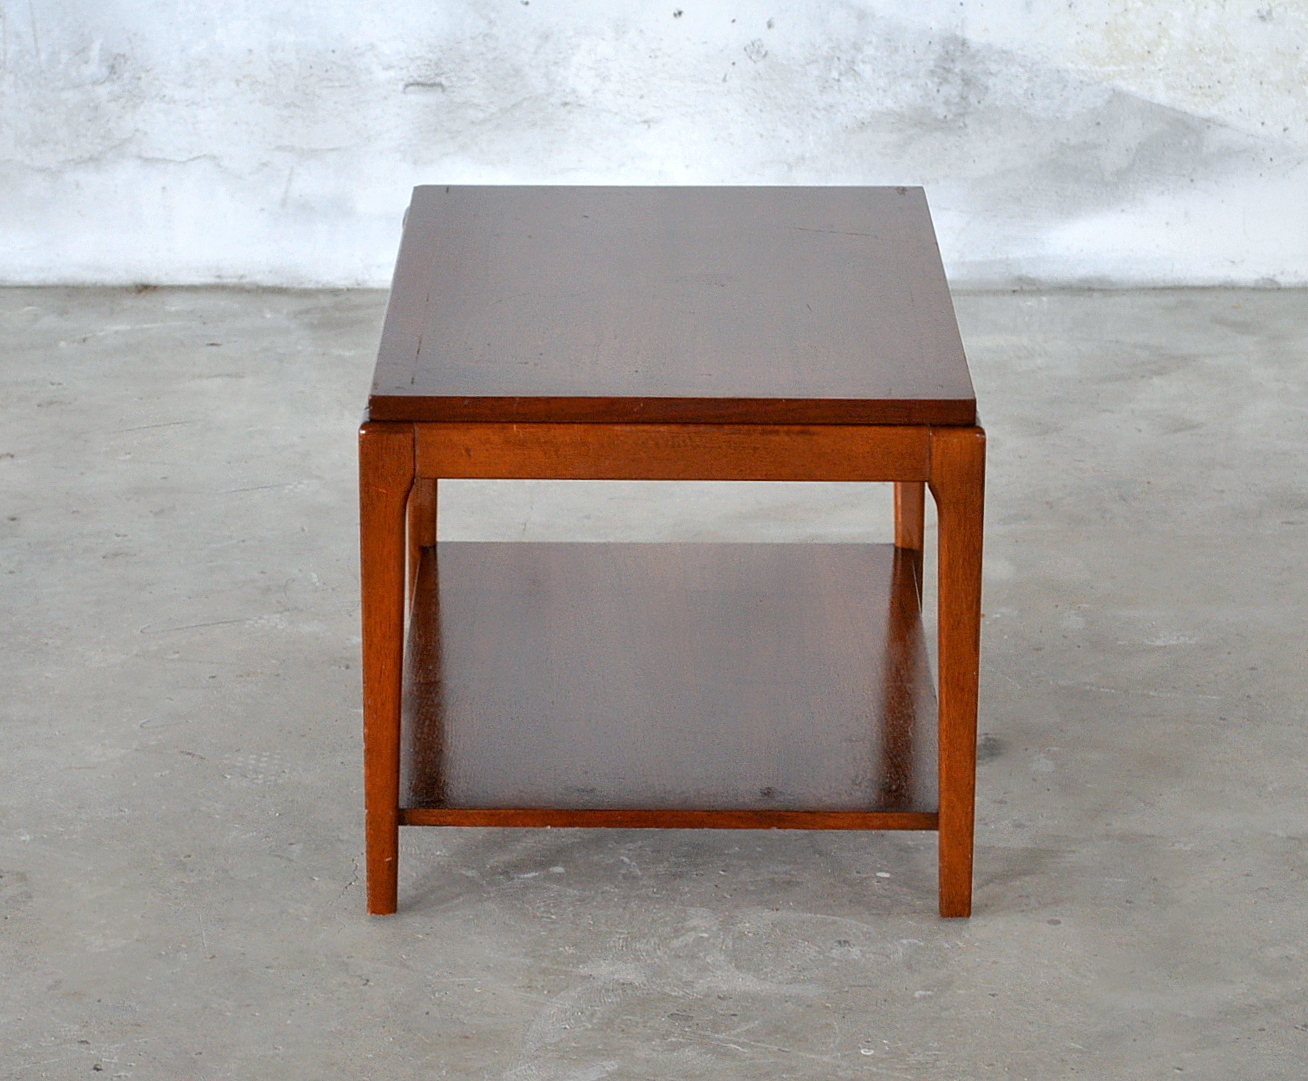 SELECT MODERN: Mid Century Modern Side / End Table / Small Coffee Table